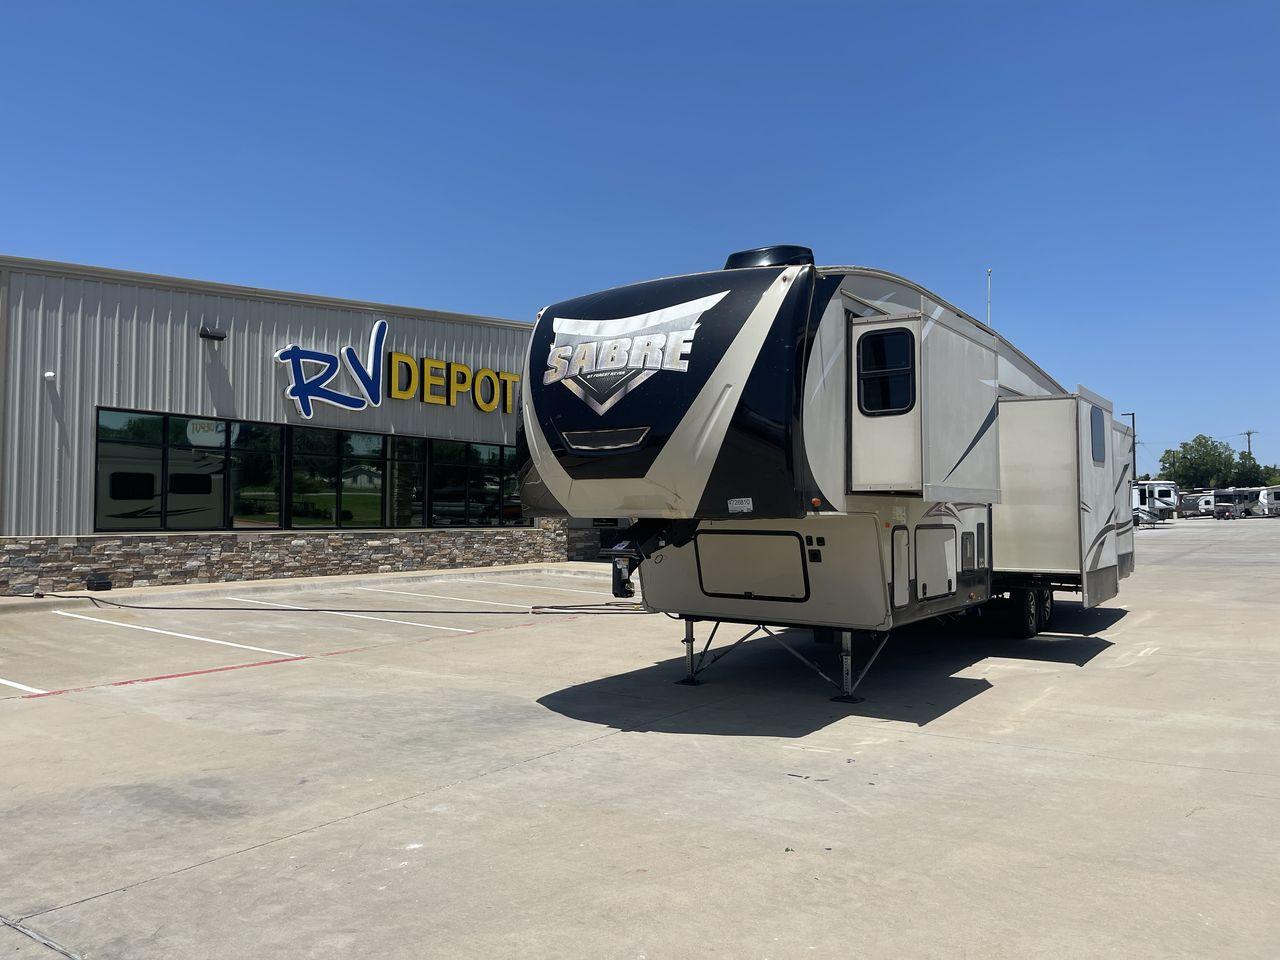 2017 FOREST RIVER SABRE 365MB (4X4FSRN22H3) , Length: 42.42 ft | Dry Weight: 12,994 lbs | Gross Weight: 15,500 lbs | Slides: 4 transmission, located at 4319 N Main Street, Cleburne, TX, 76033, (817) 221-0660, 32.435829, -97.384178 - The 2017 Forest River Sabre 365MB is a roomy fifth wheel that is meant to make camping trips more comfortable. With its spacious layout and thoughtful features, this RV provides a luxury home away from home. The unit measures 42.42 feet in length and weighs 12,994 lbs. dry, offers enough space for r - Photo #0